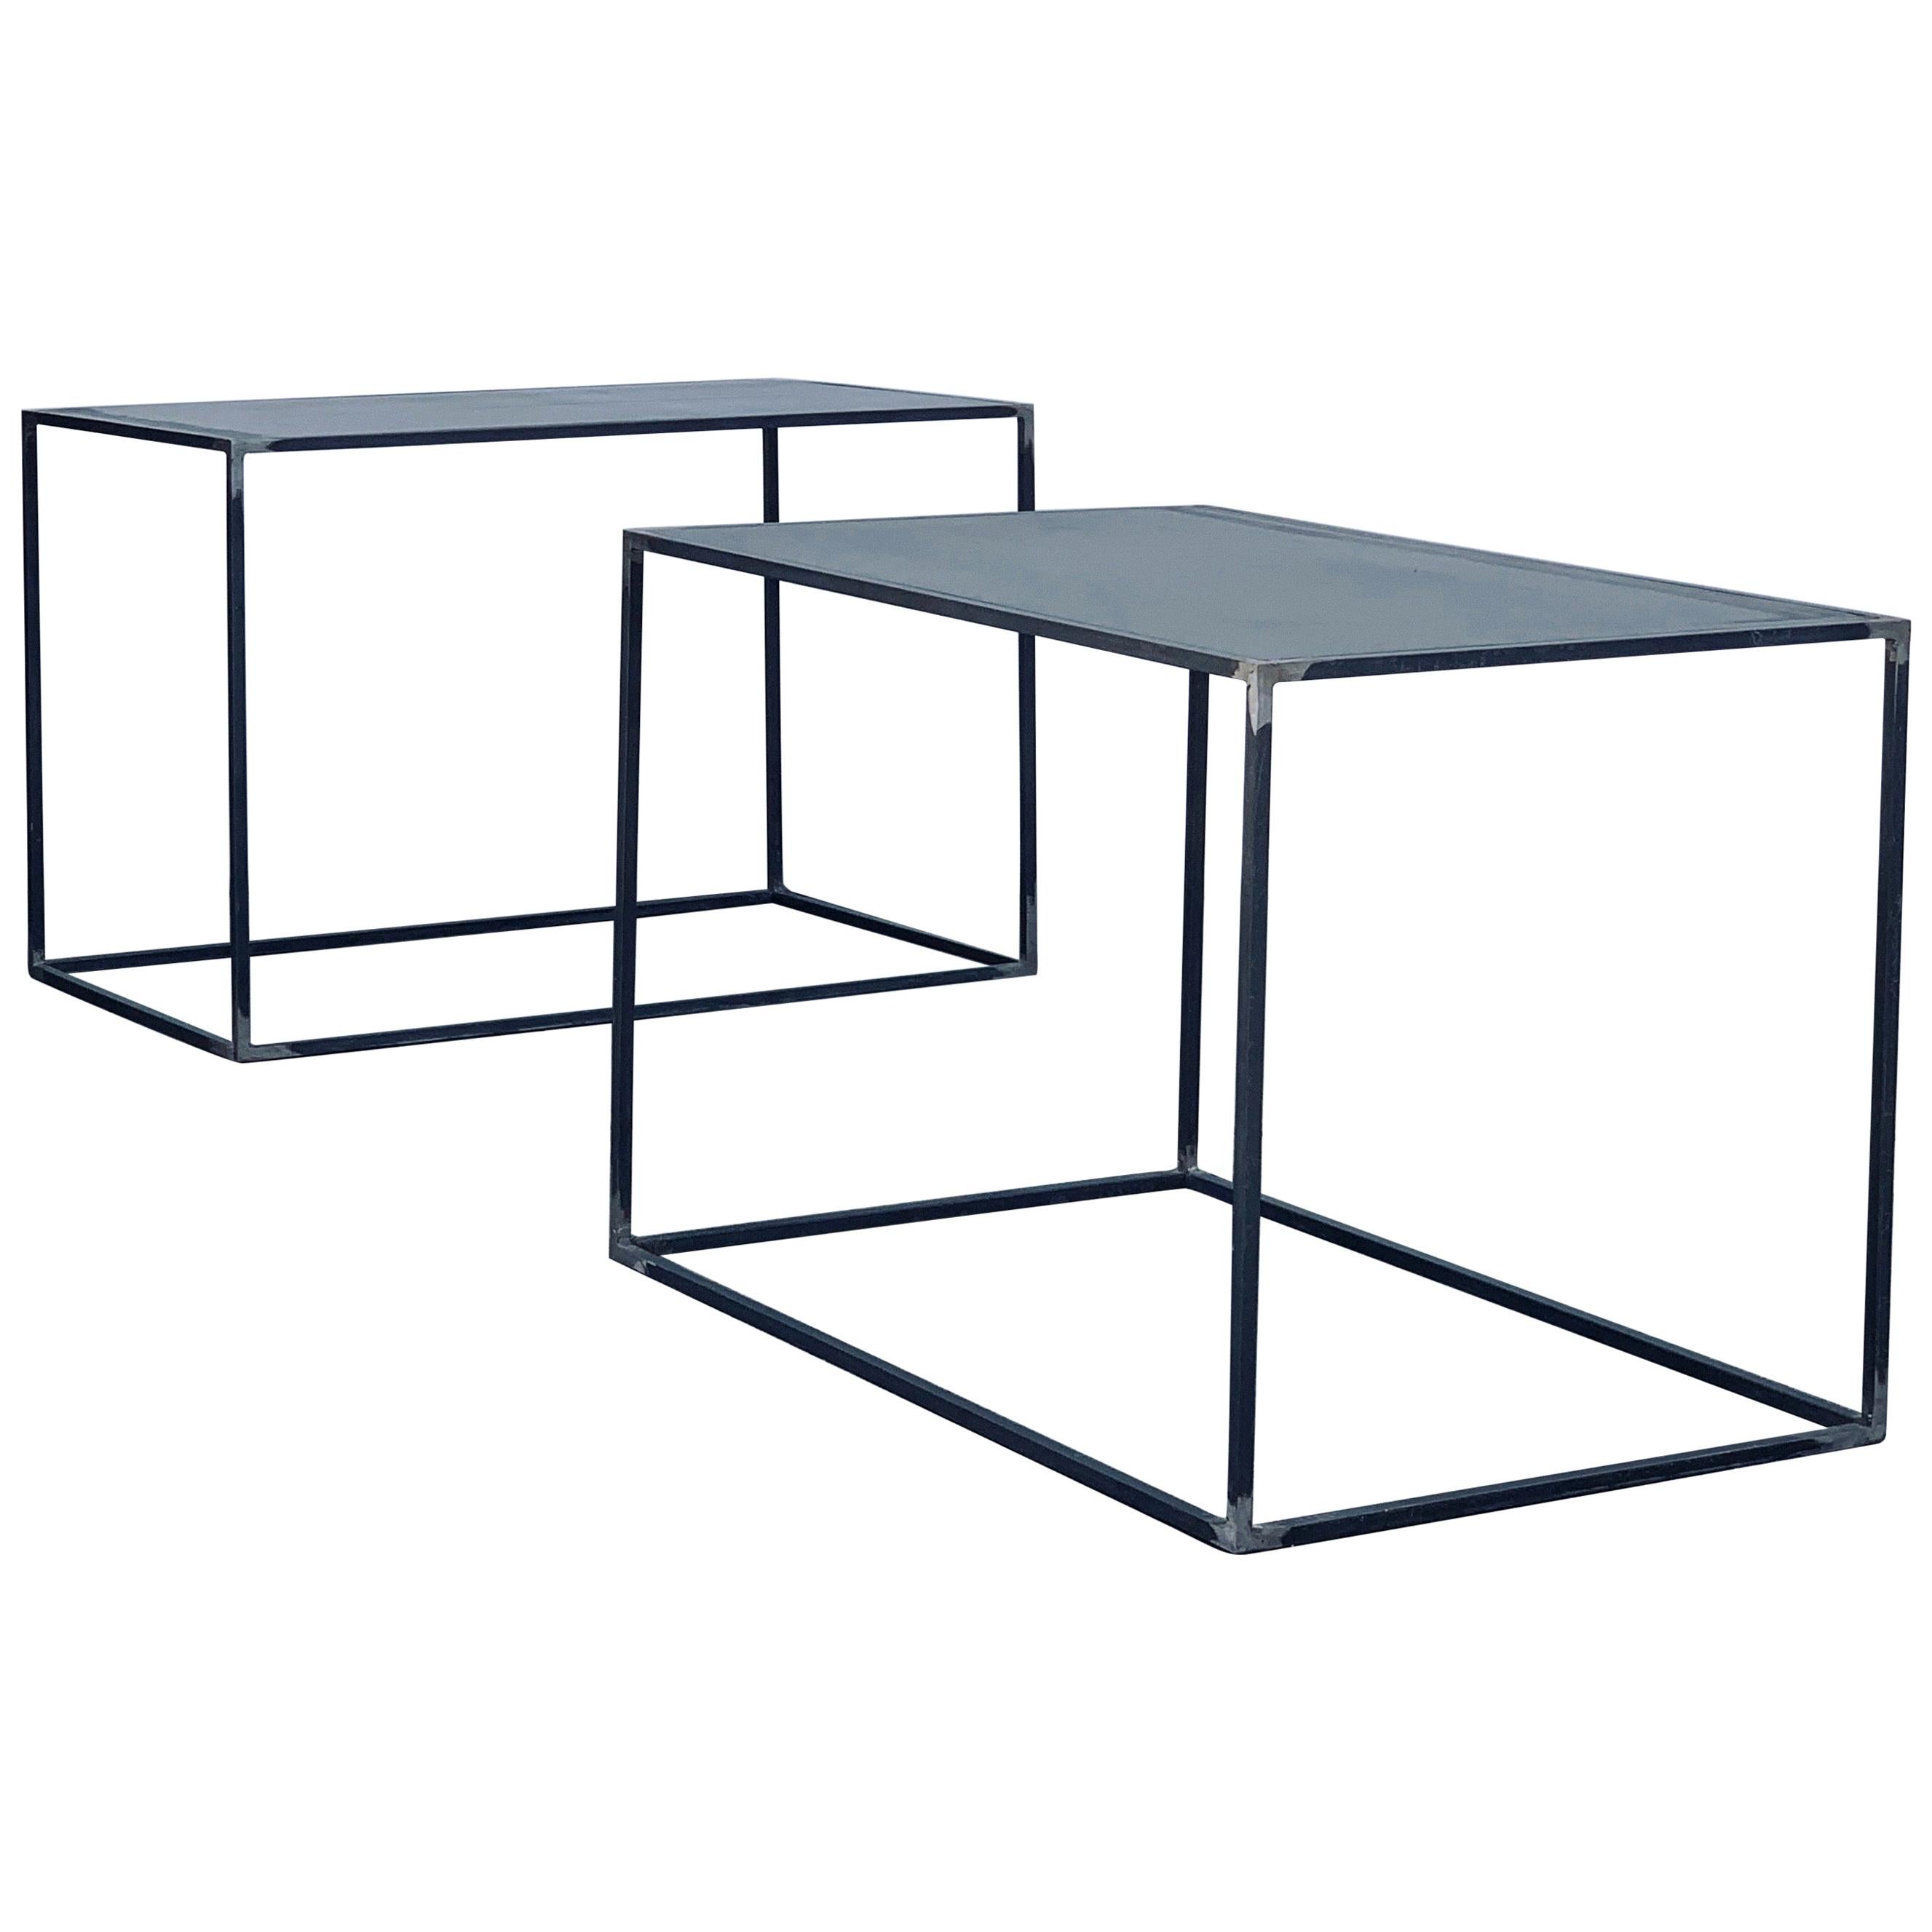 Pair of Large Minimalist 'Filiforme' Patinated Steel End Tables by Design Frères